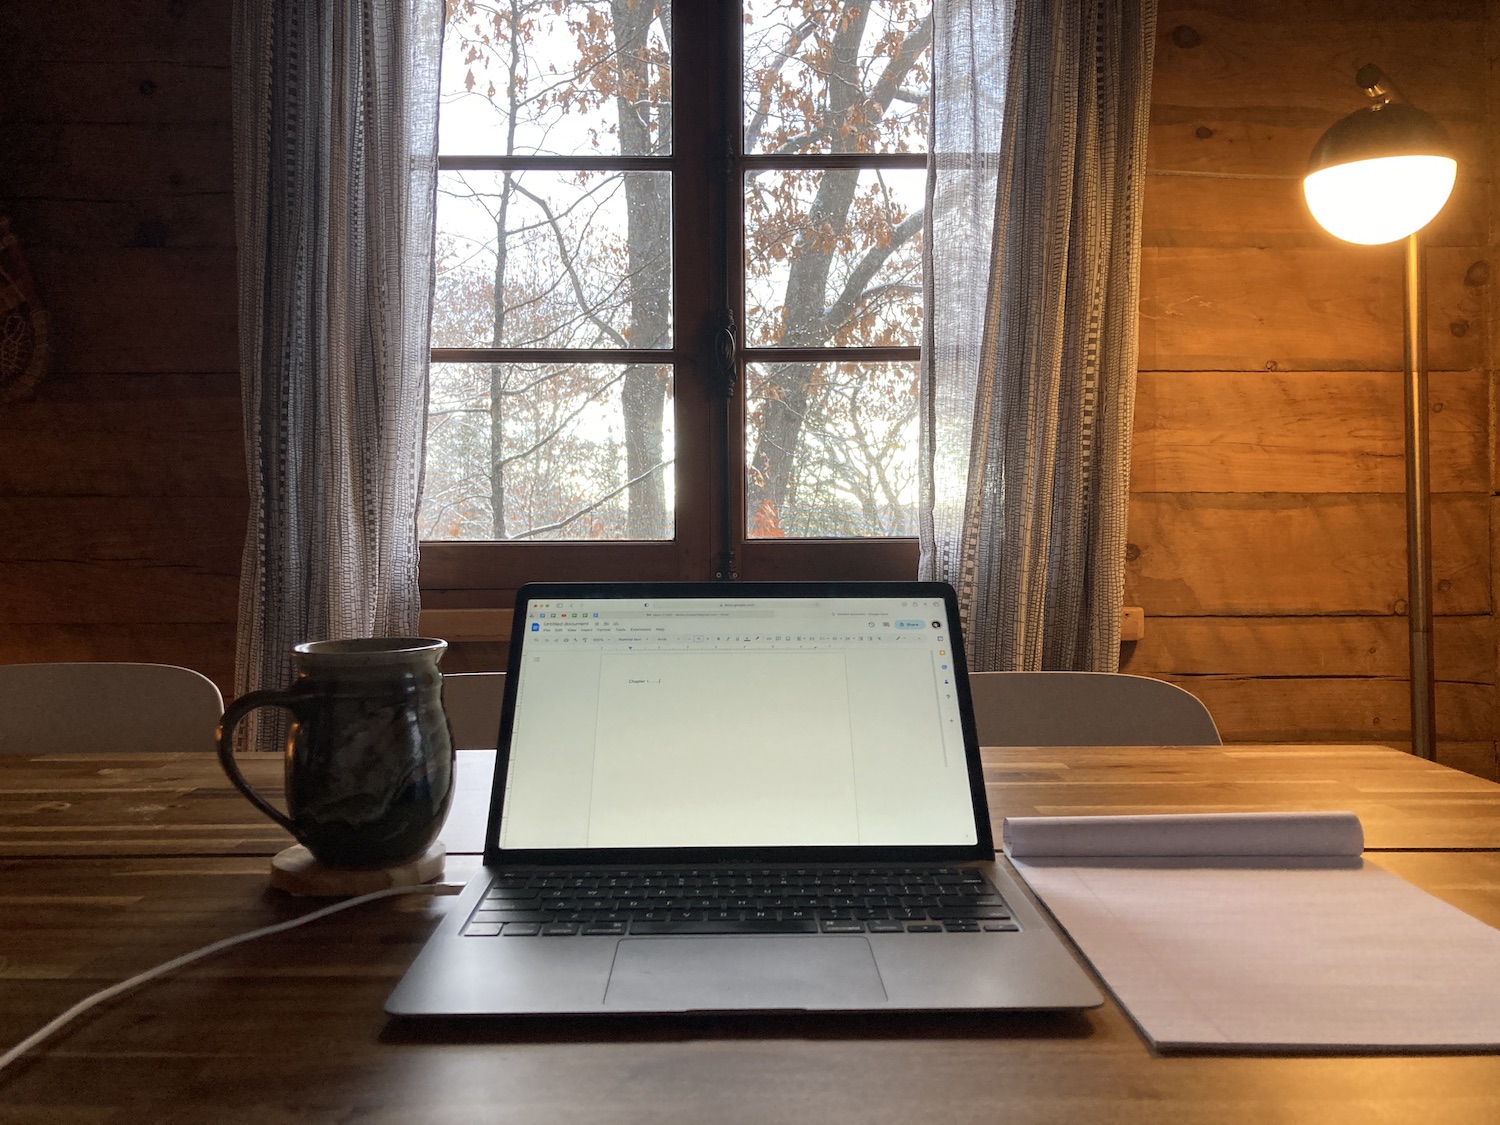 An open laptop sits next to a mug and notepad, in front of a window with a large tree outside. The walls in the room are wooden, like in a cabin.